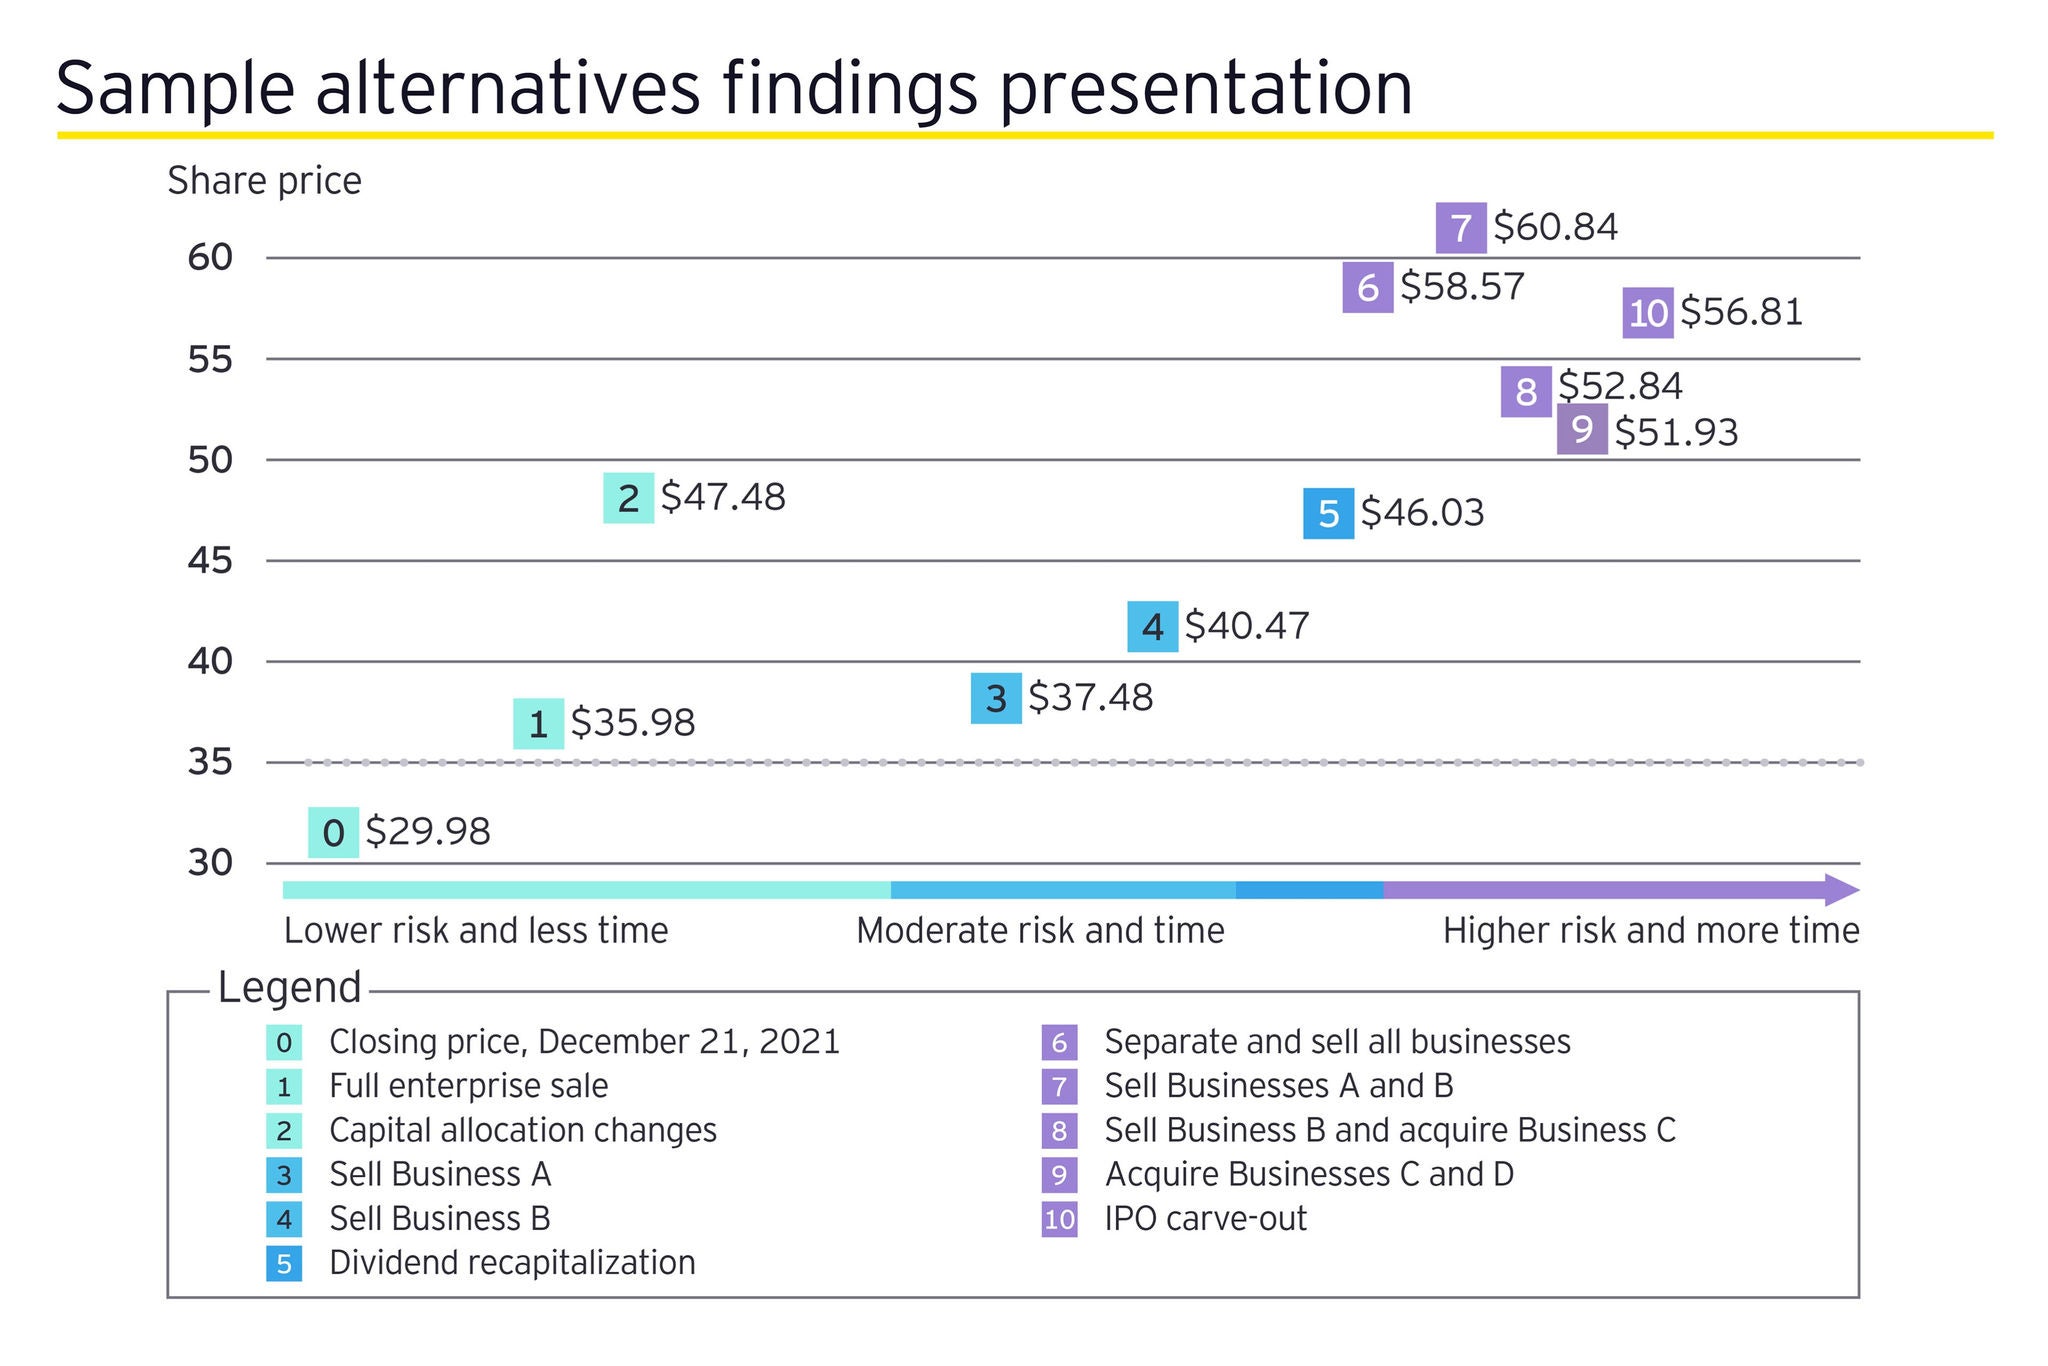 EY Sample Findings graphic